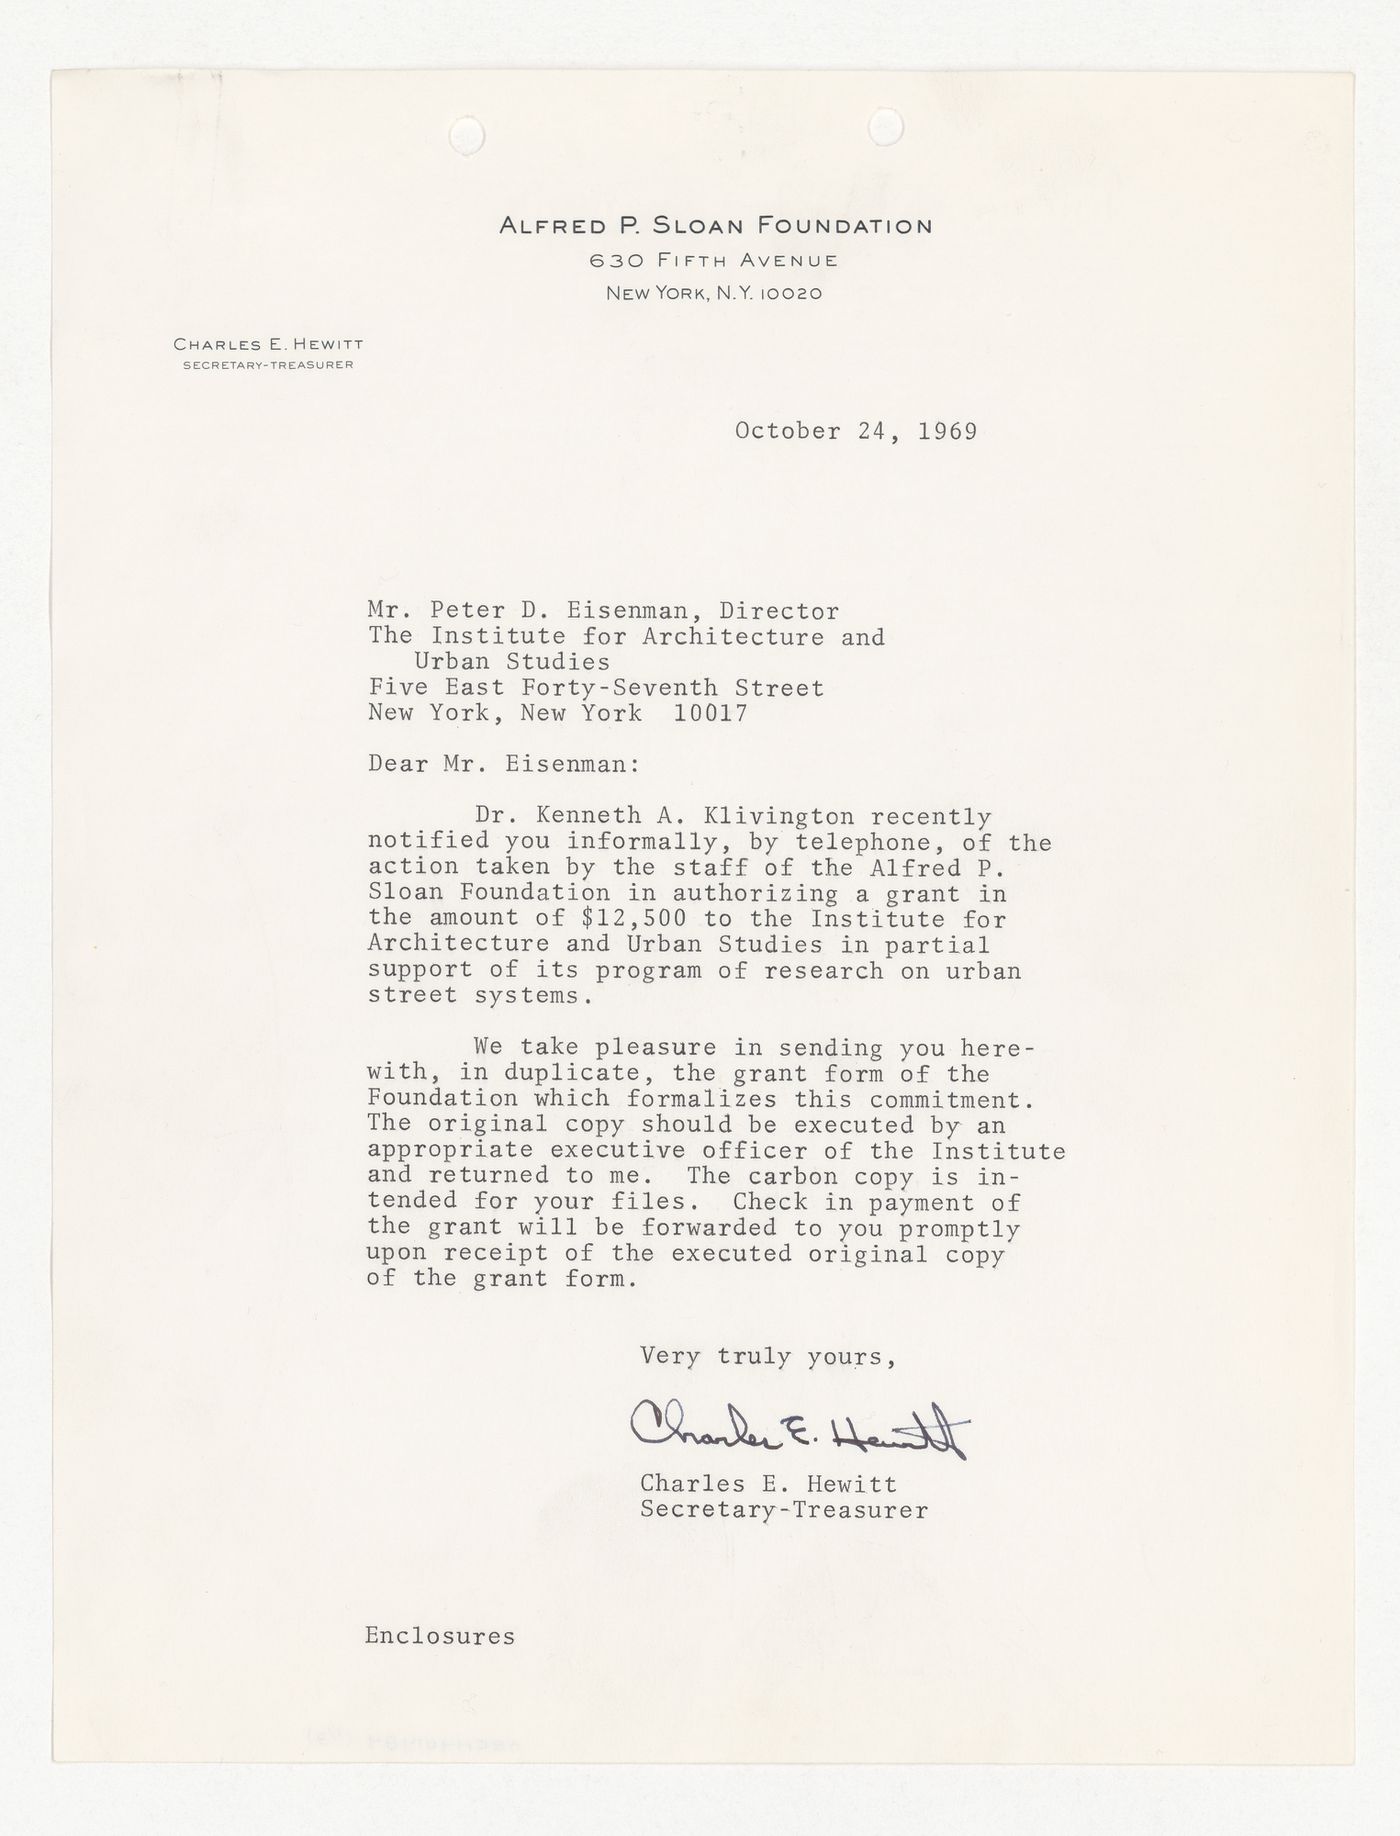 Letter from Charles E. Hewitt to Peter D. Eisenman with attached grant form signed by Peter D. Eisenman